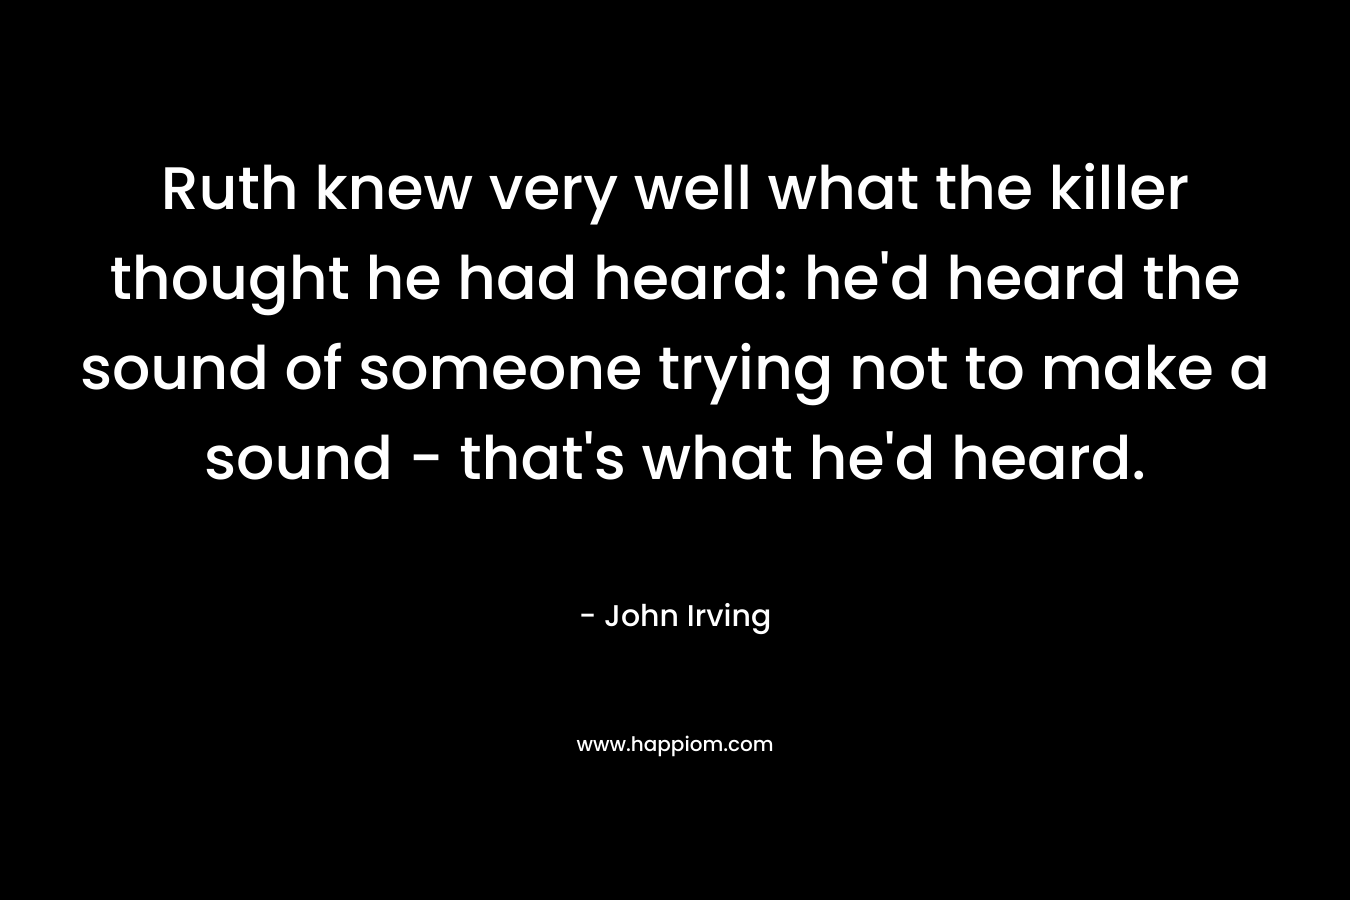 Ruth knew very well what the killer thought he had heard: he’d heard the sound of someone trying not to make a sound – that’s what he’d heard. – John Irving